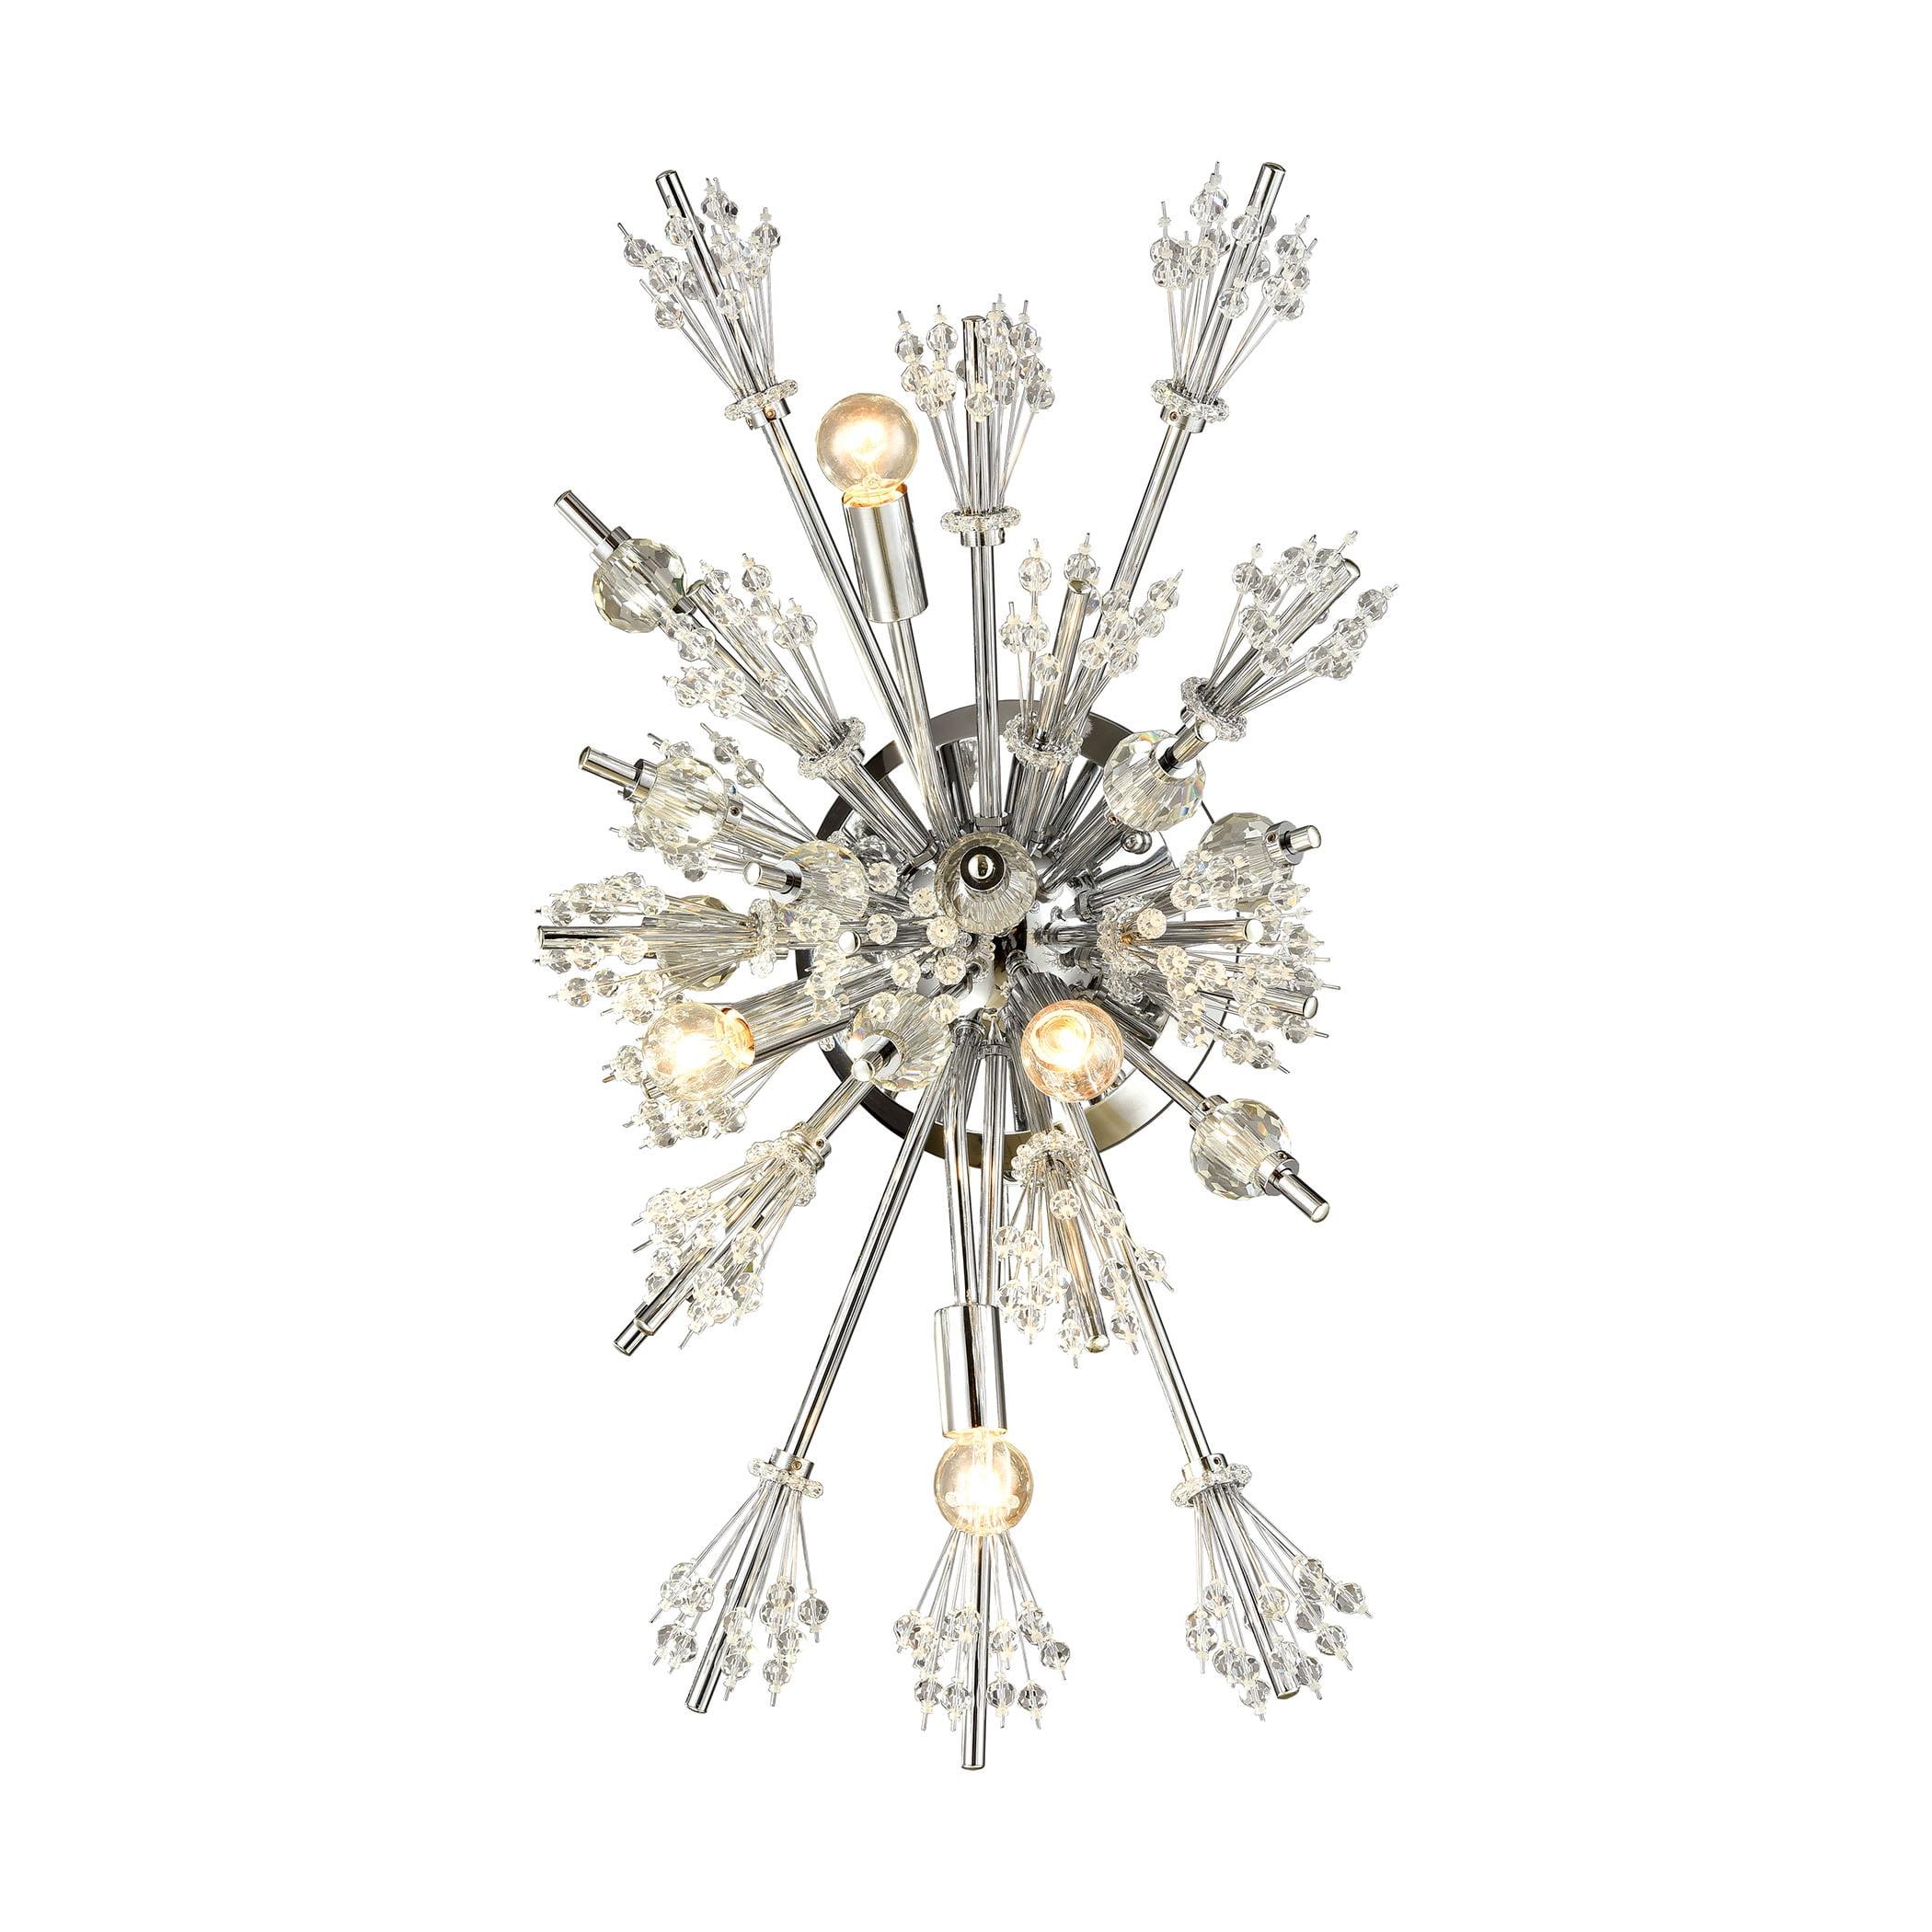 Celestial Chrome 4-Light Polished Sconce with Faceted Crystal Balls